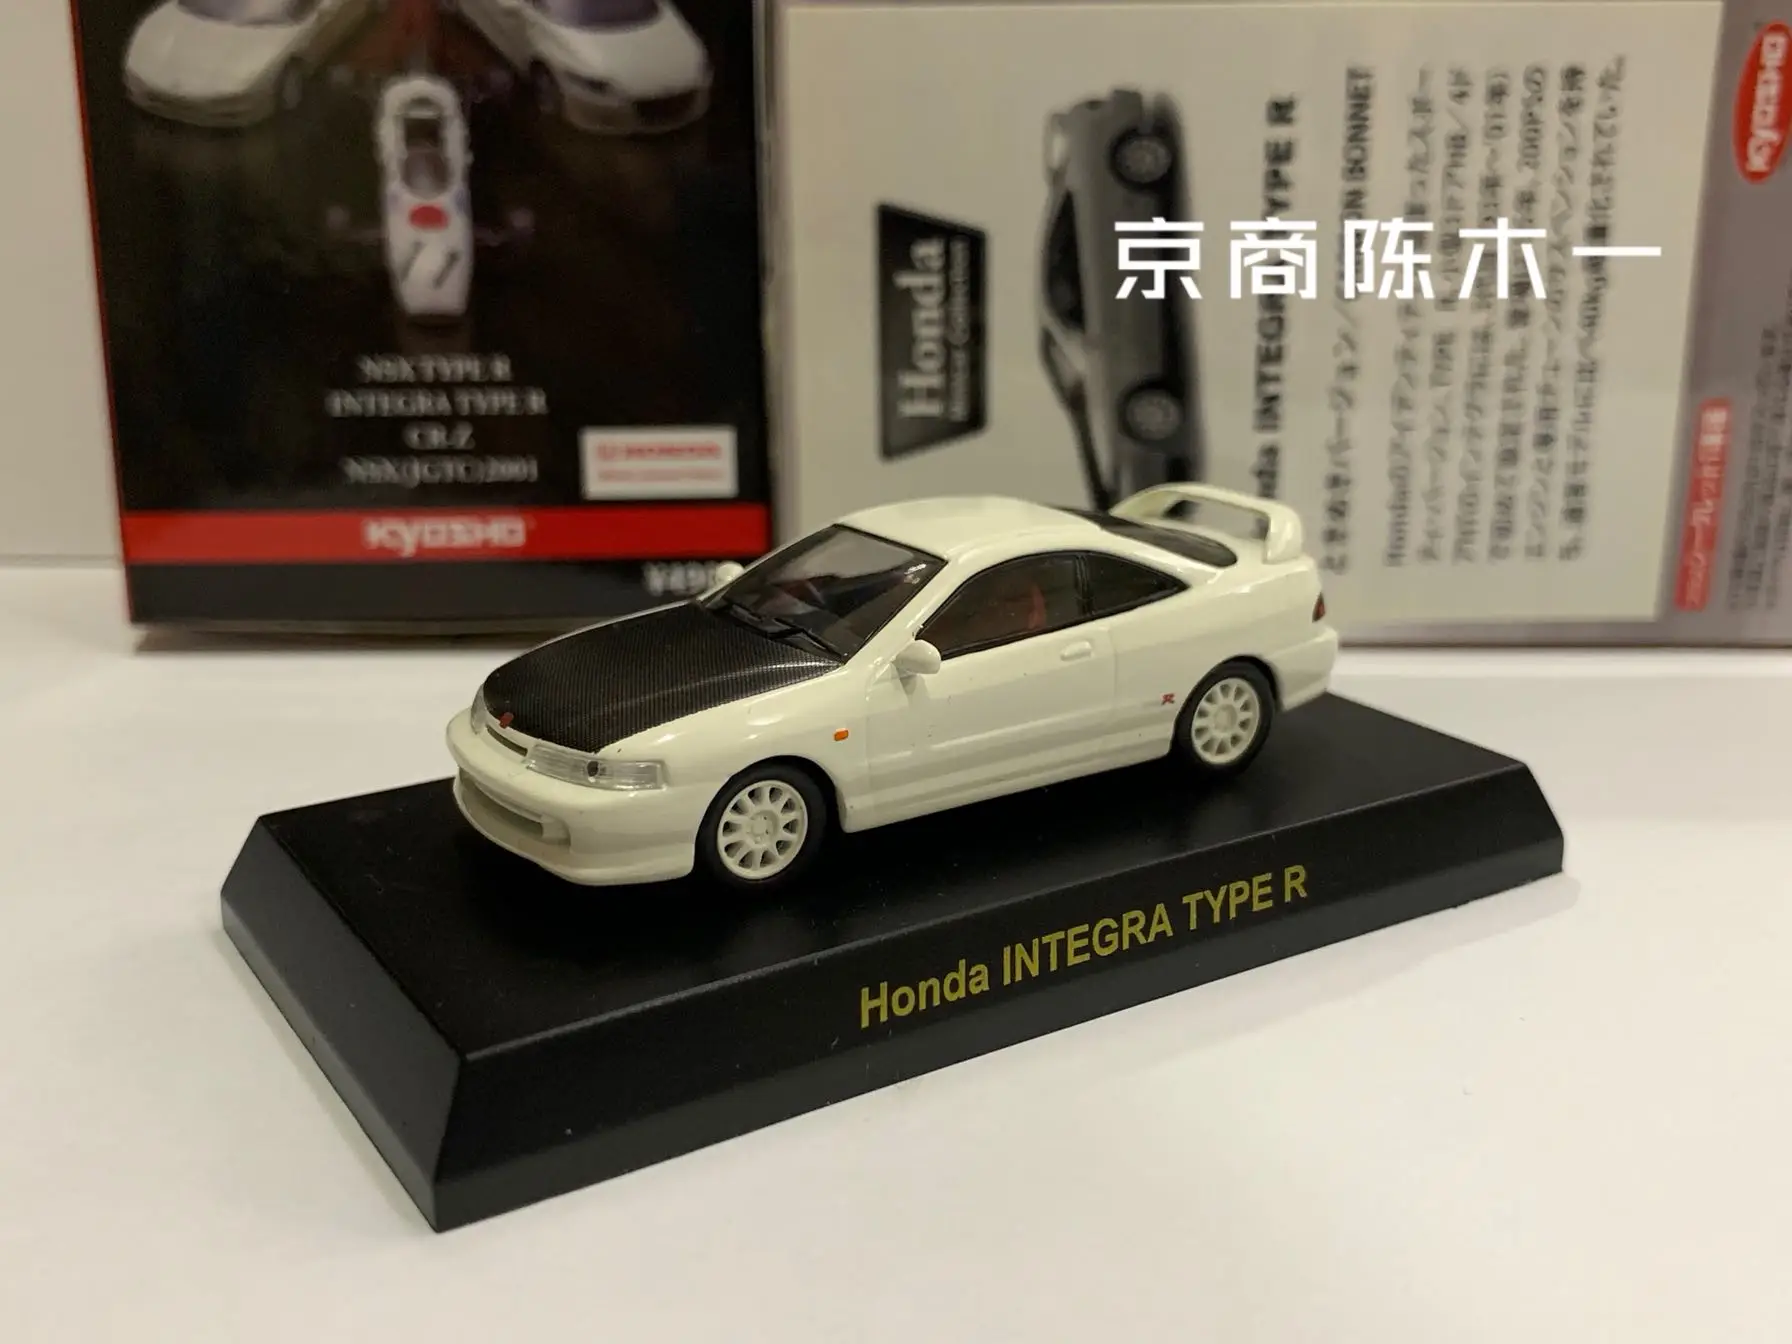 

1/64 KYOSHO Honda Integra Type R DC2 Collection of die-cast alloy car decoration model toys